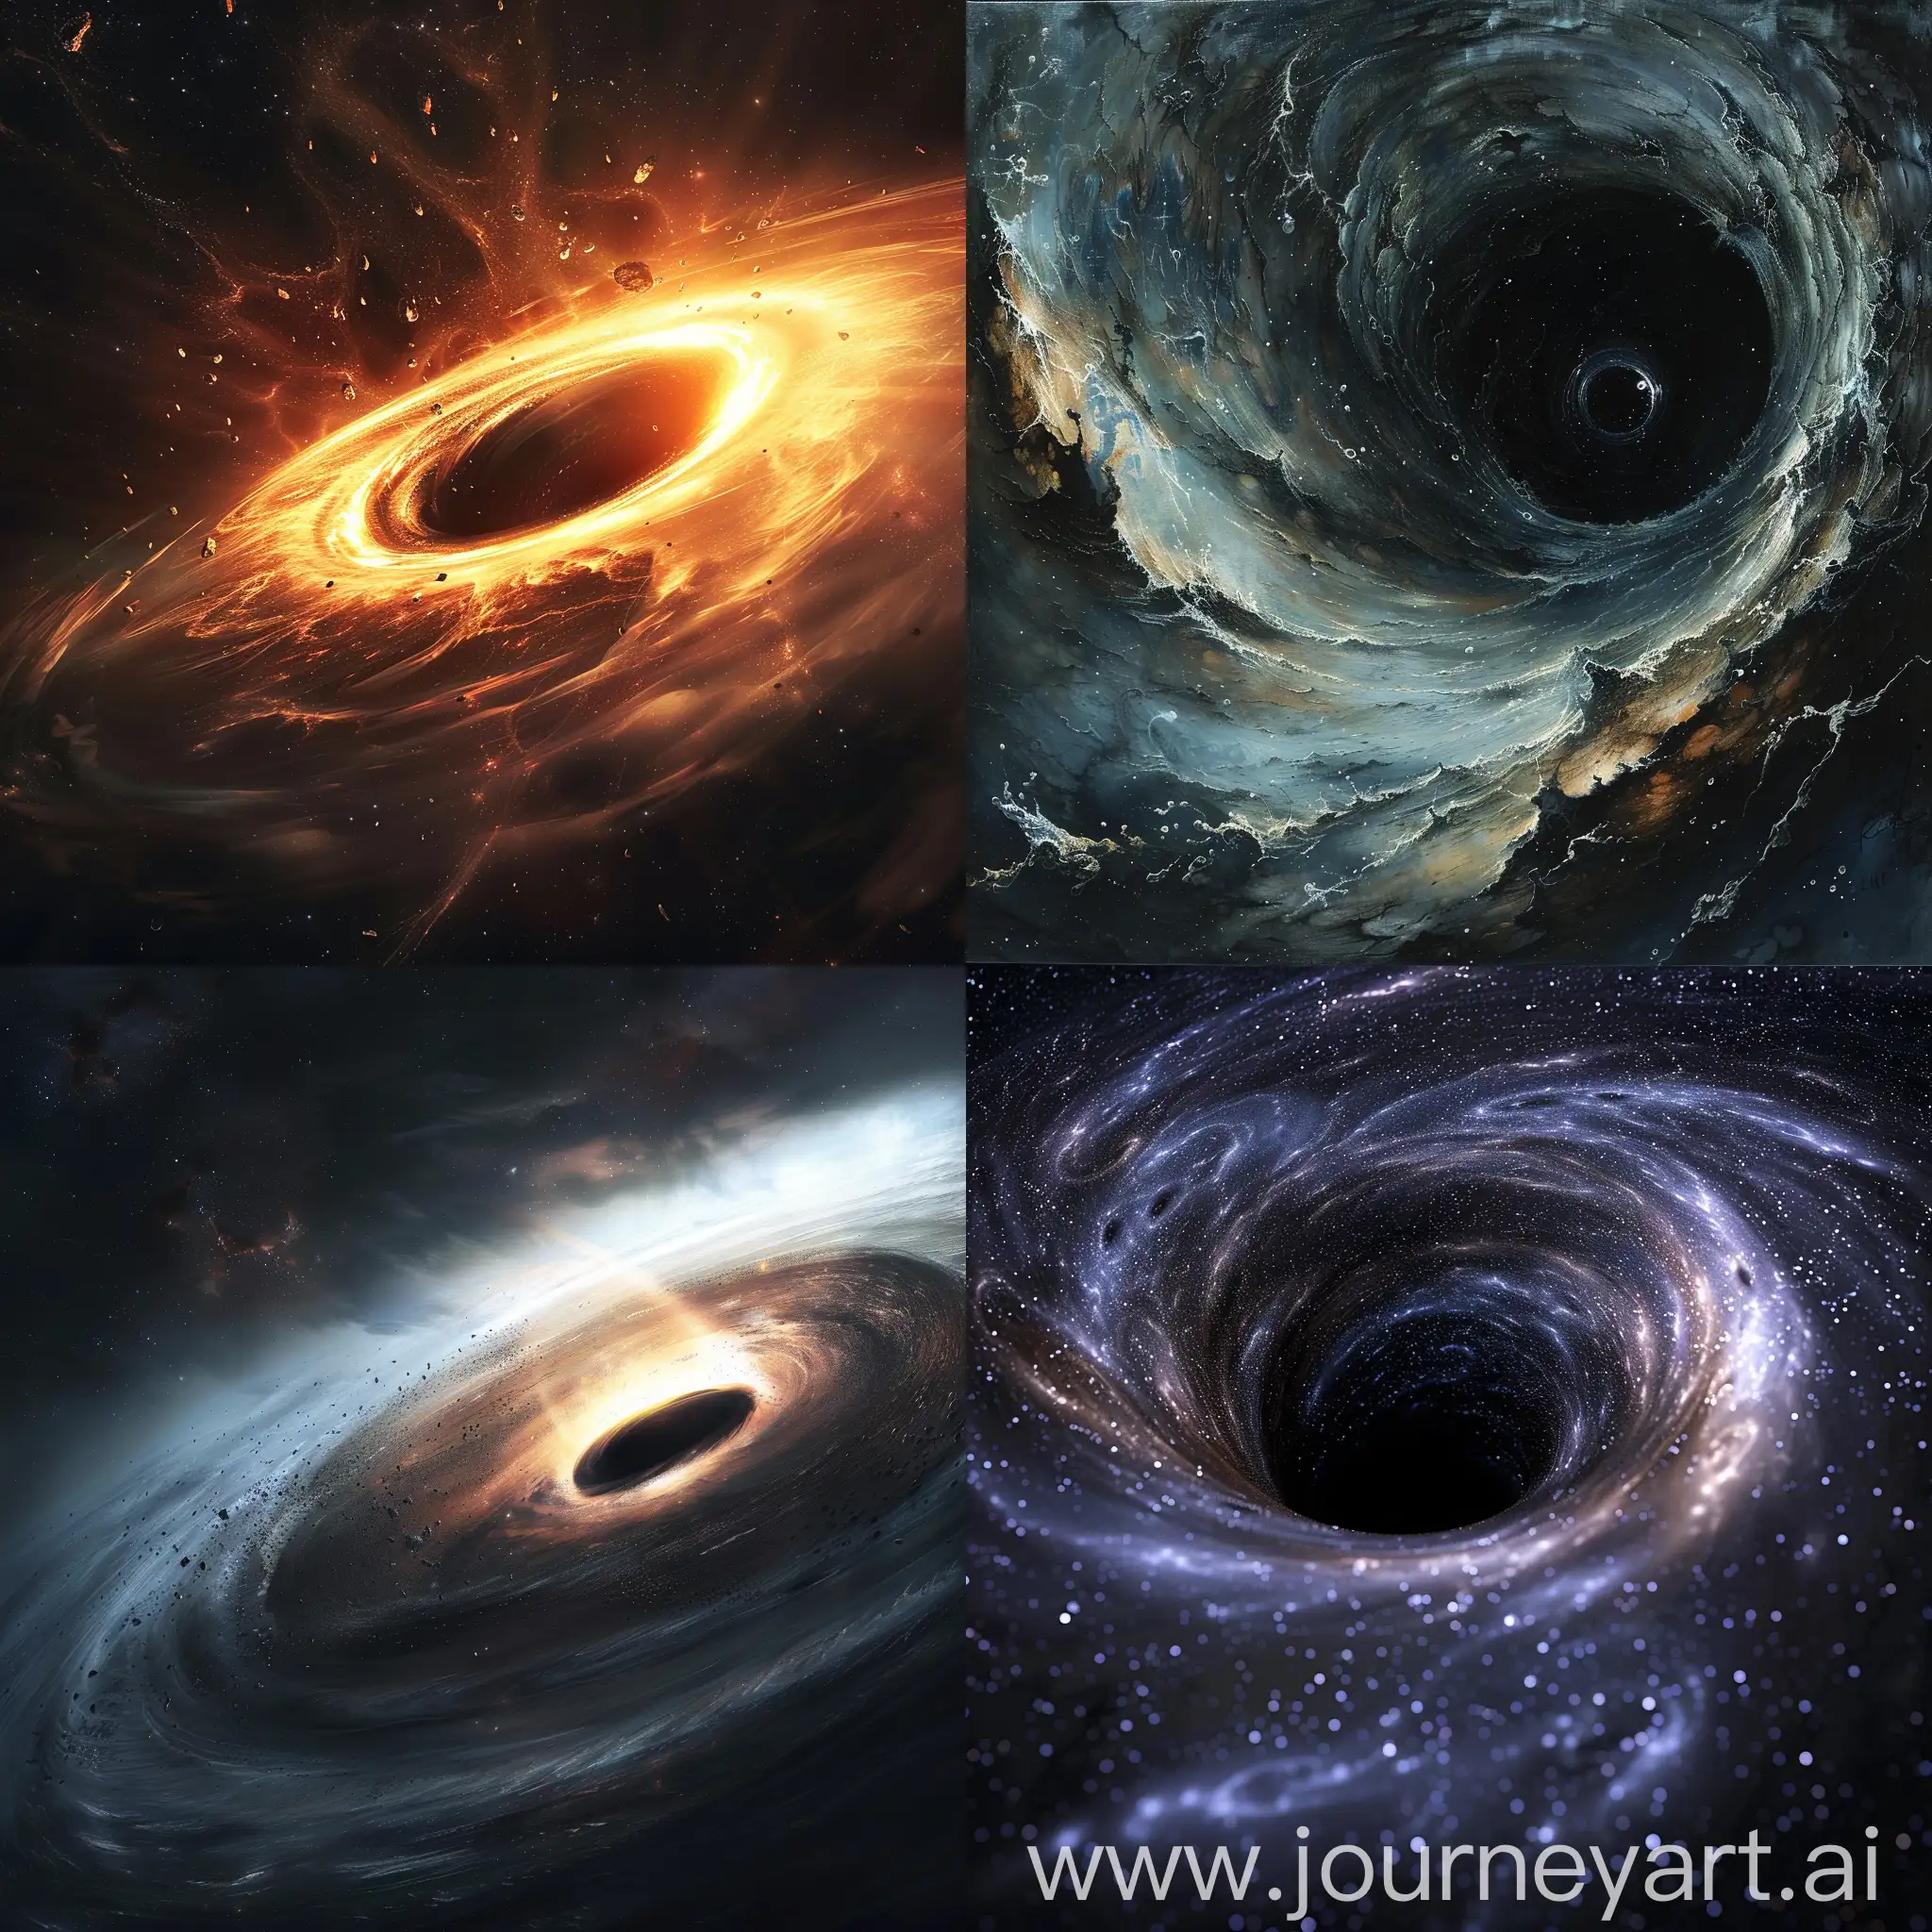 Mysterious-Cosmic-Event-Black-Hole-Devouring-a-Star